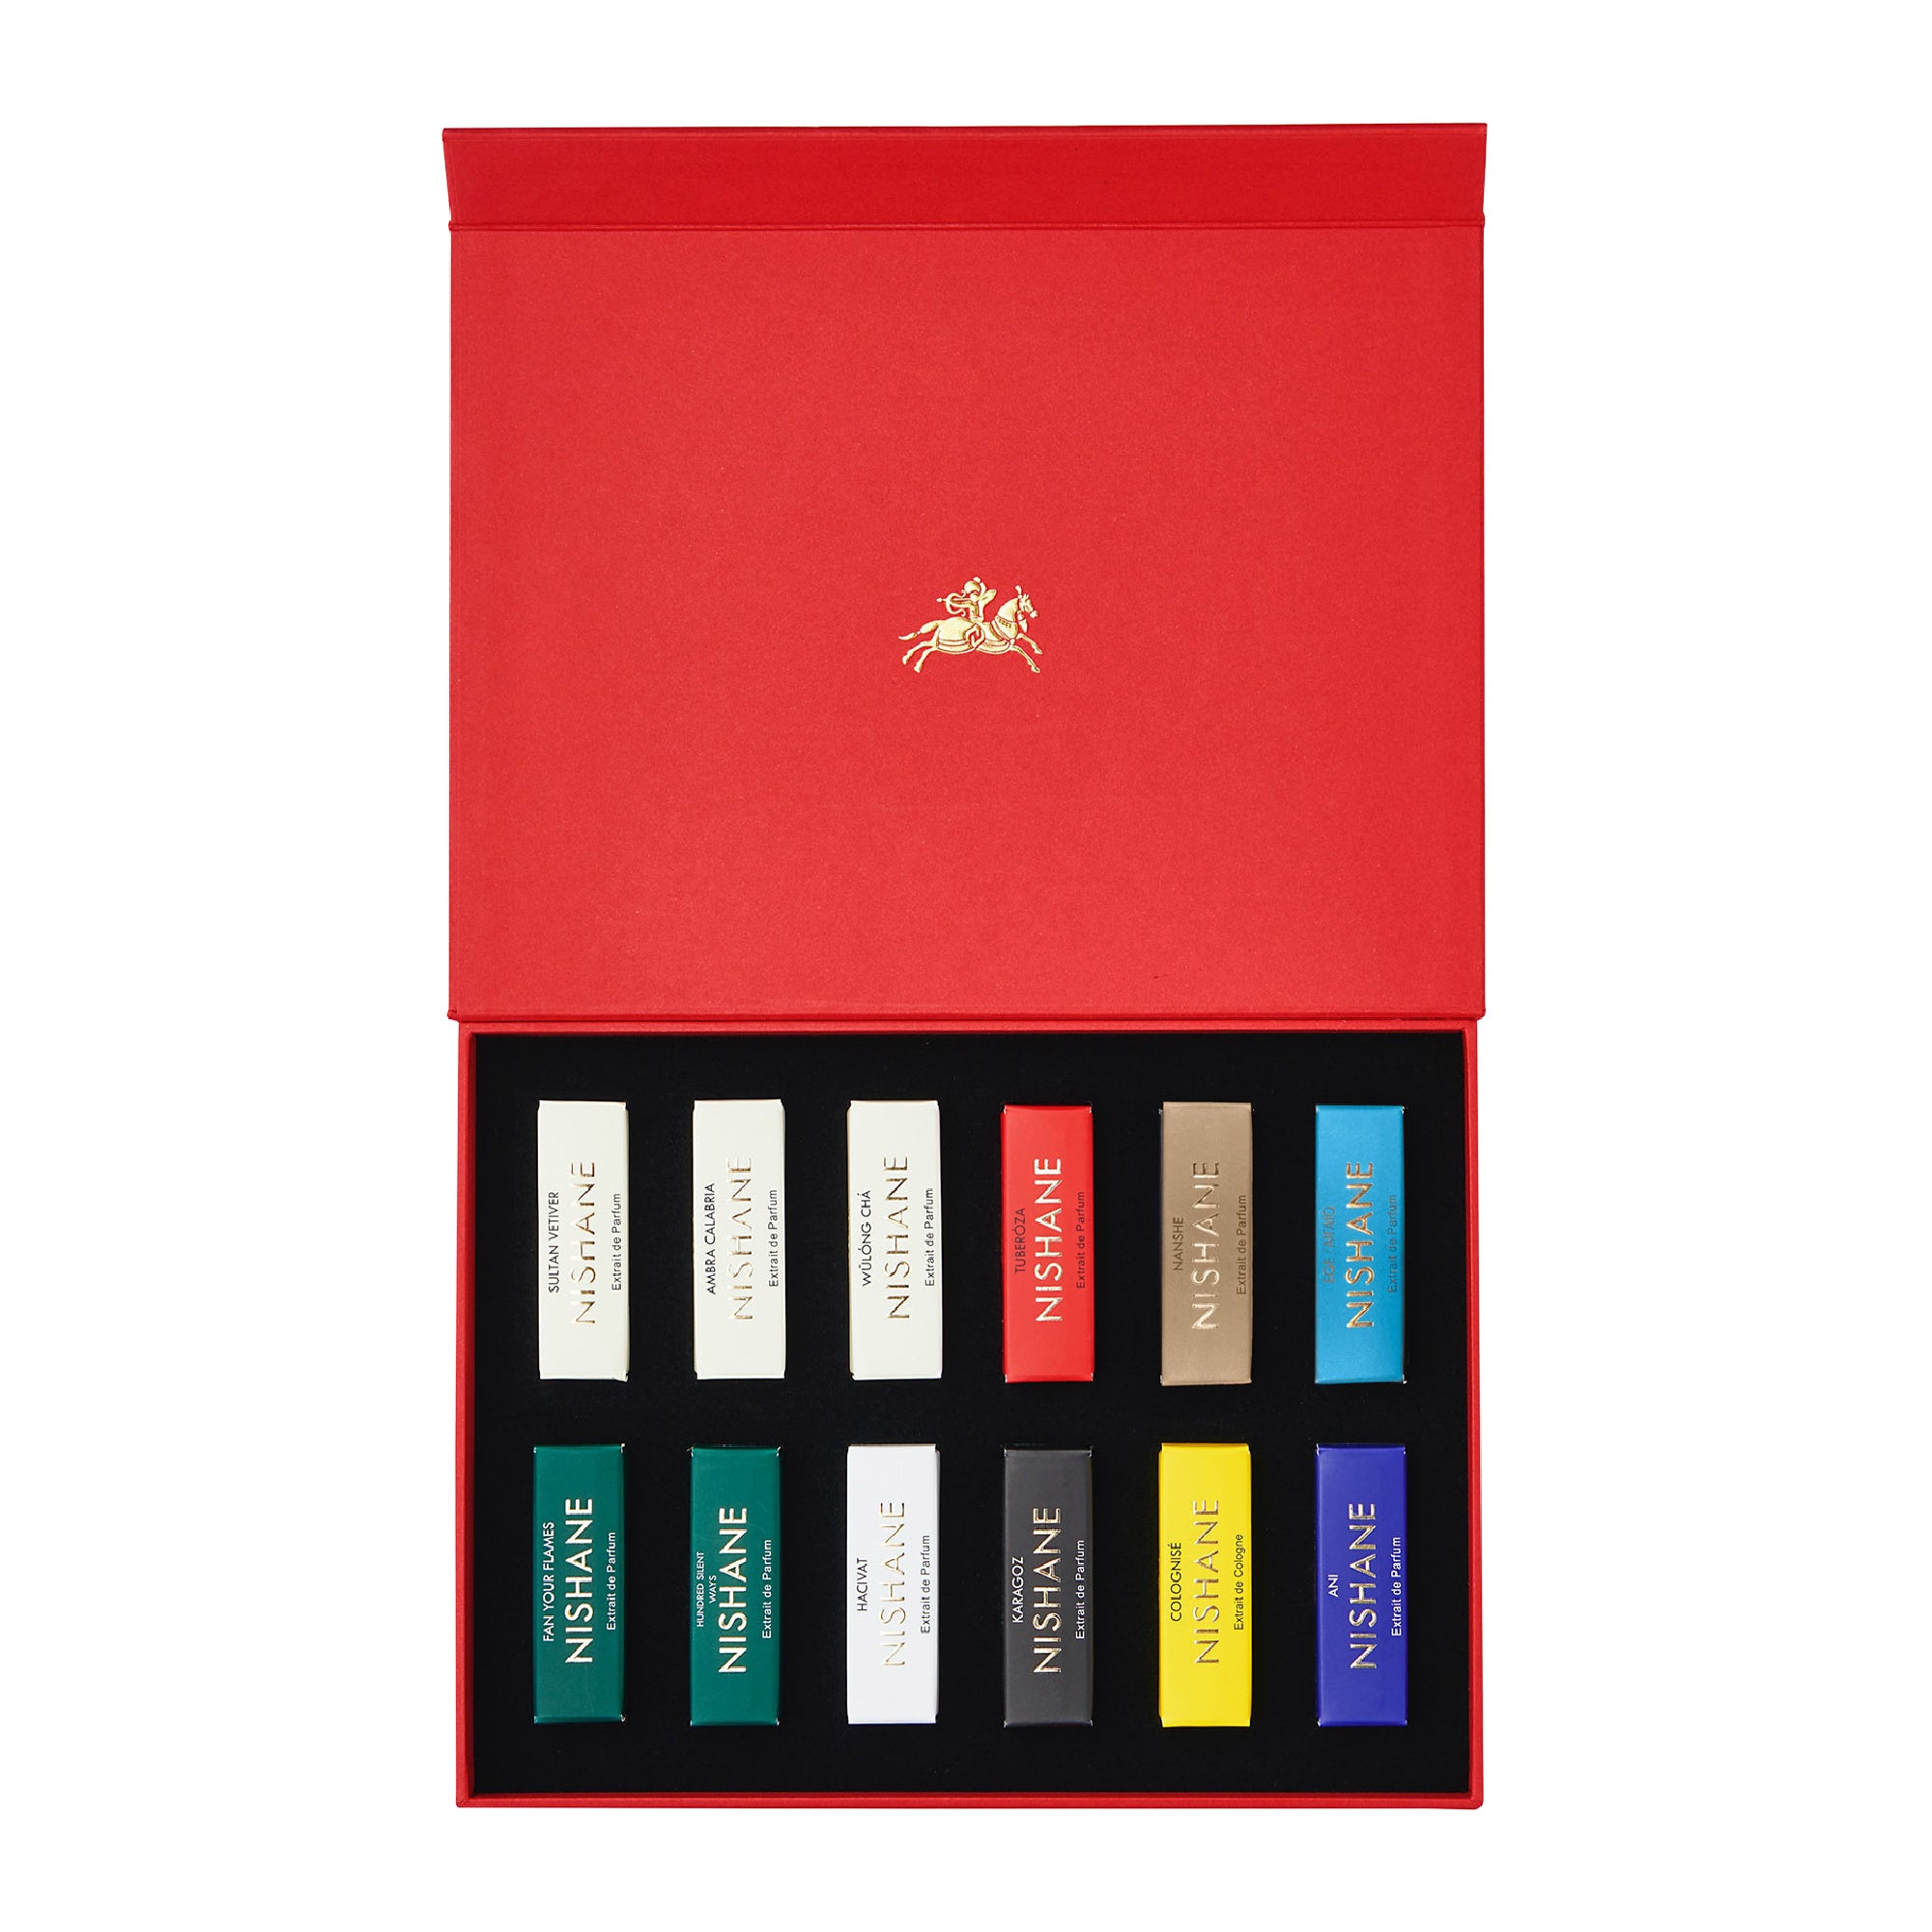 Best-Selling Fragrances & Discovery Sets of 2022 - Etiket Journal